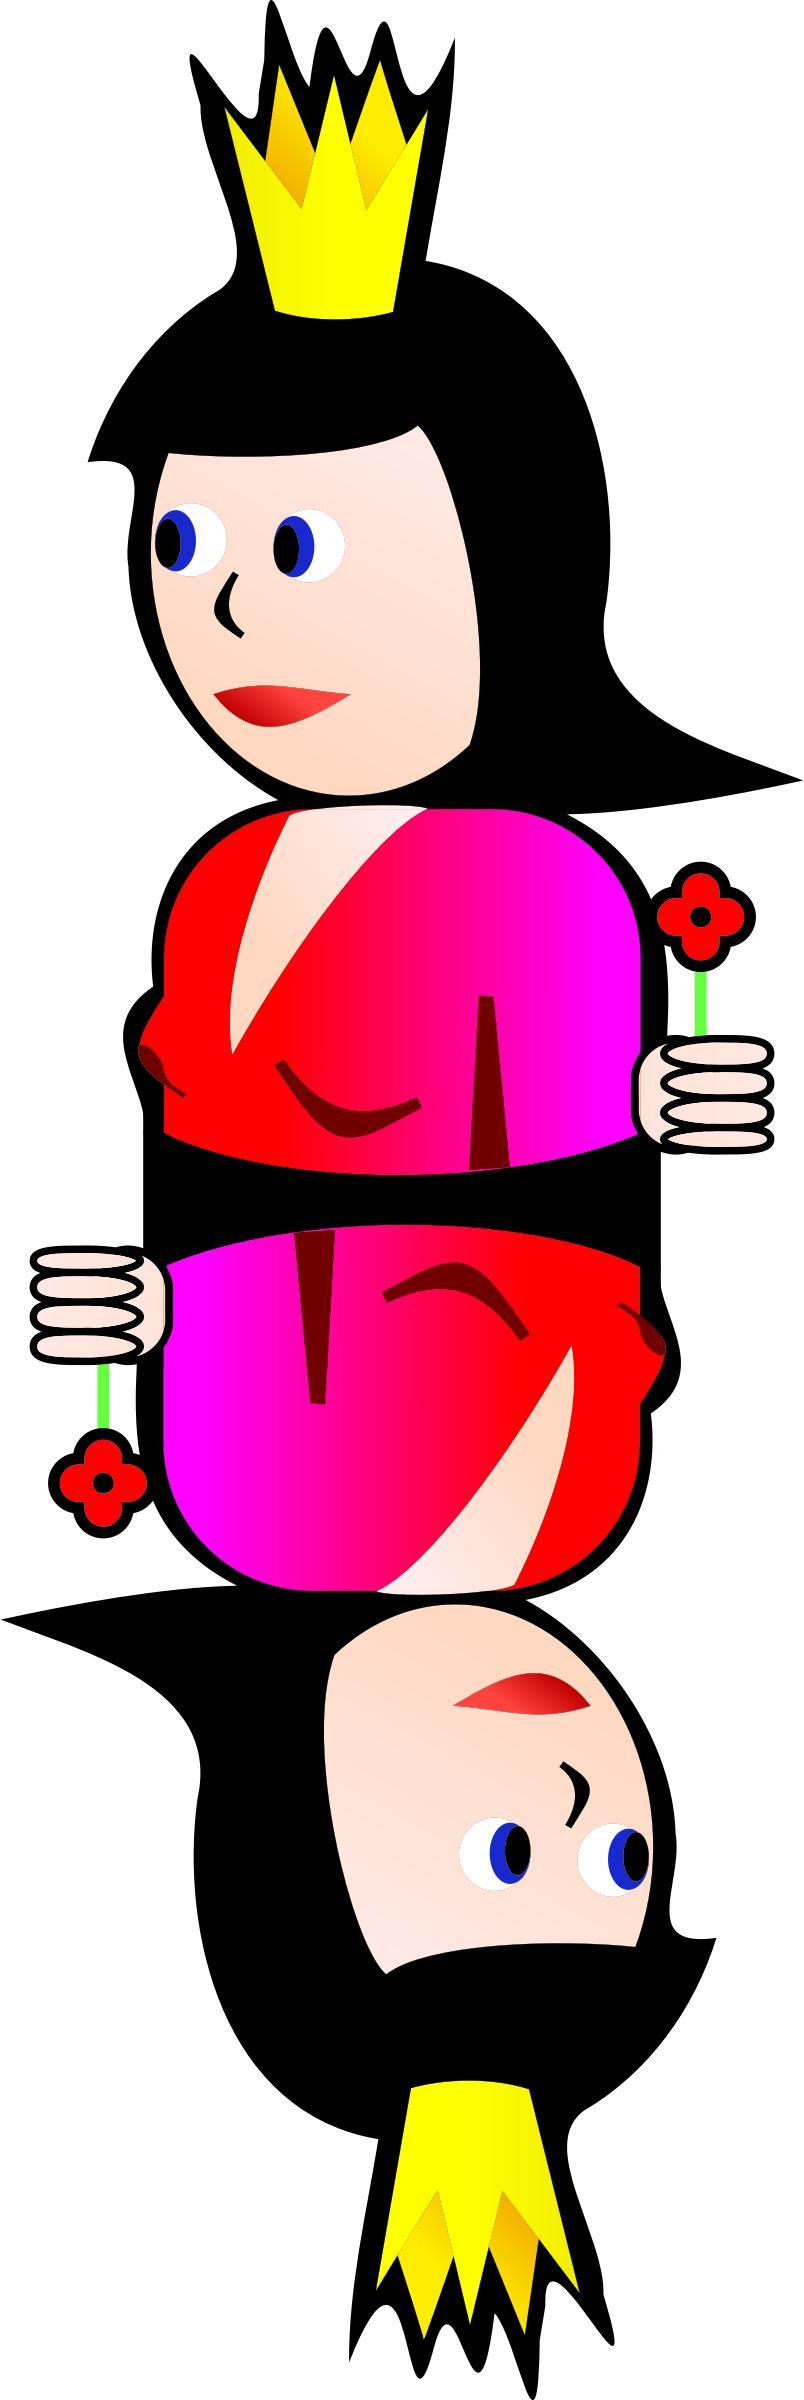 Double Queen of Hearts png transparent